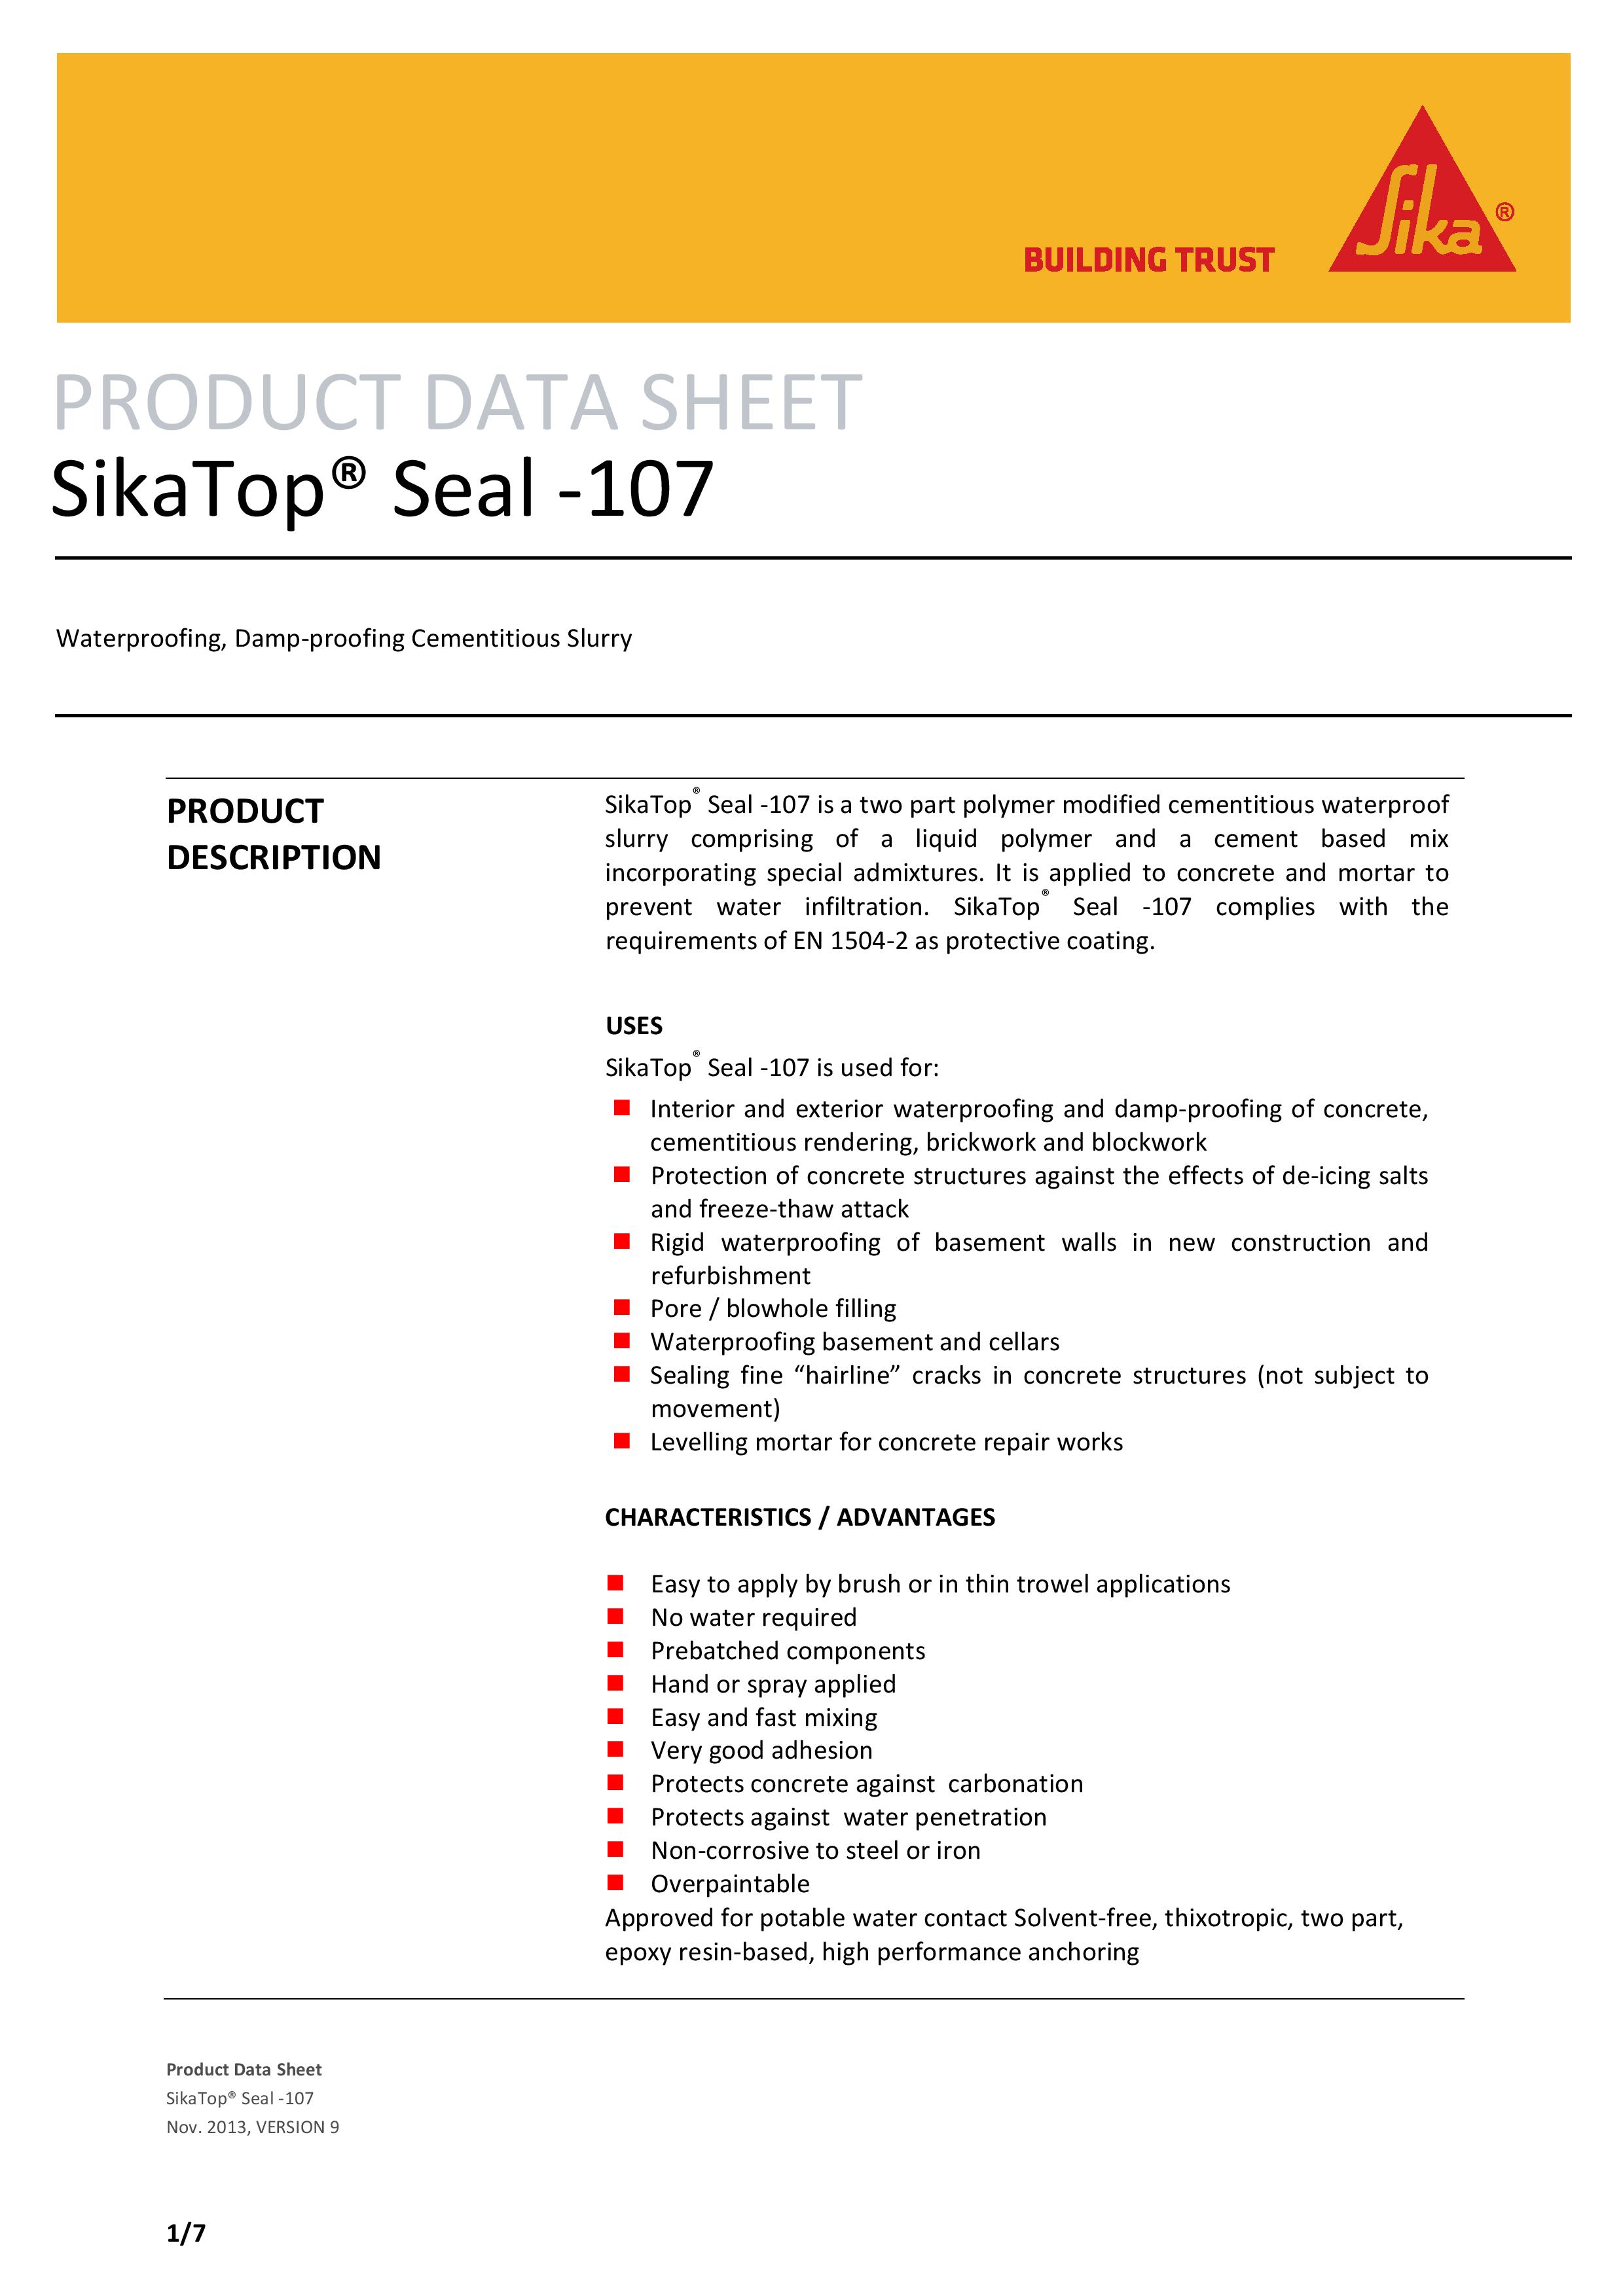 sikatop-seal-107-page-001.jpg